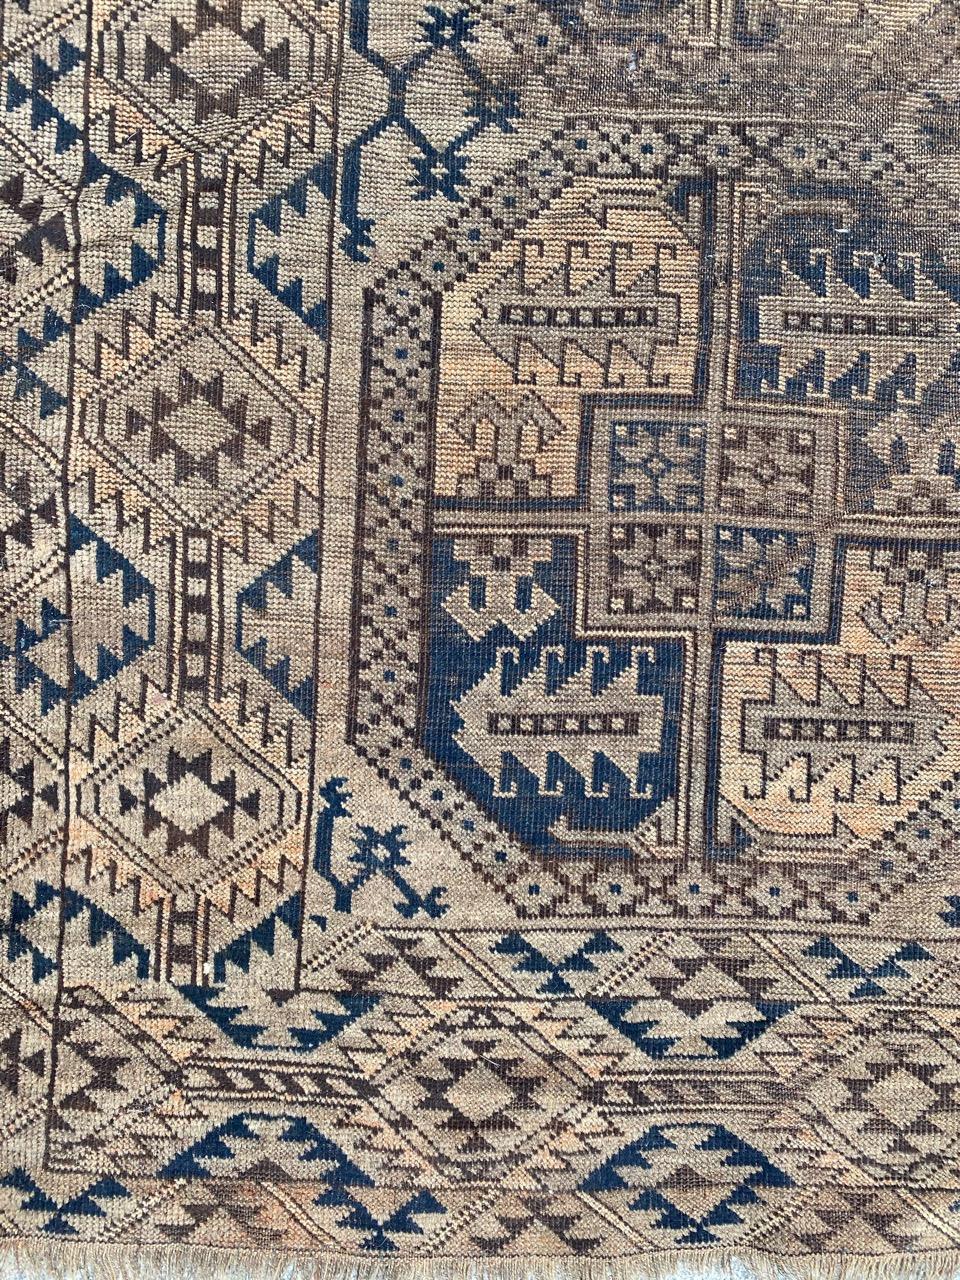 Distressed antique Turkmen Afghan rug with geometrical design and nice grey colors, entirely hand knotted with wool velvet on wool foundation.